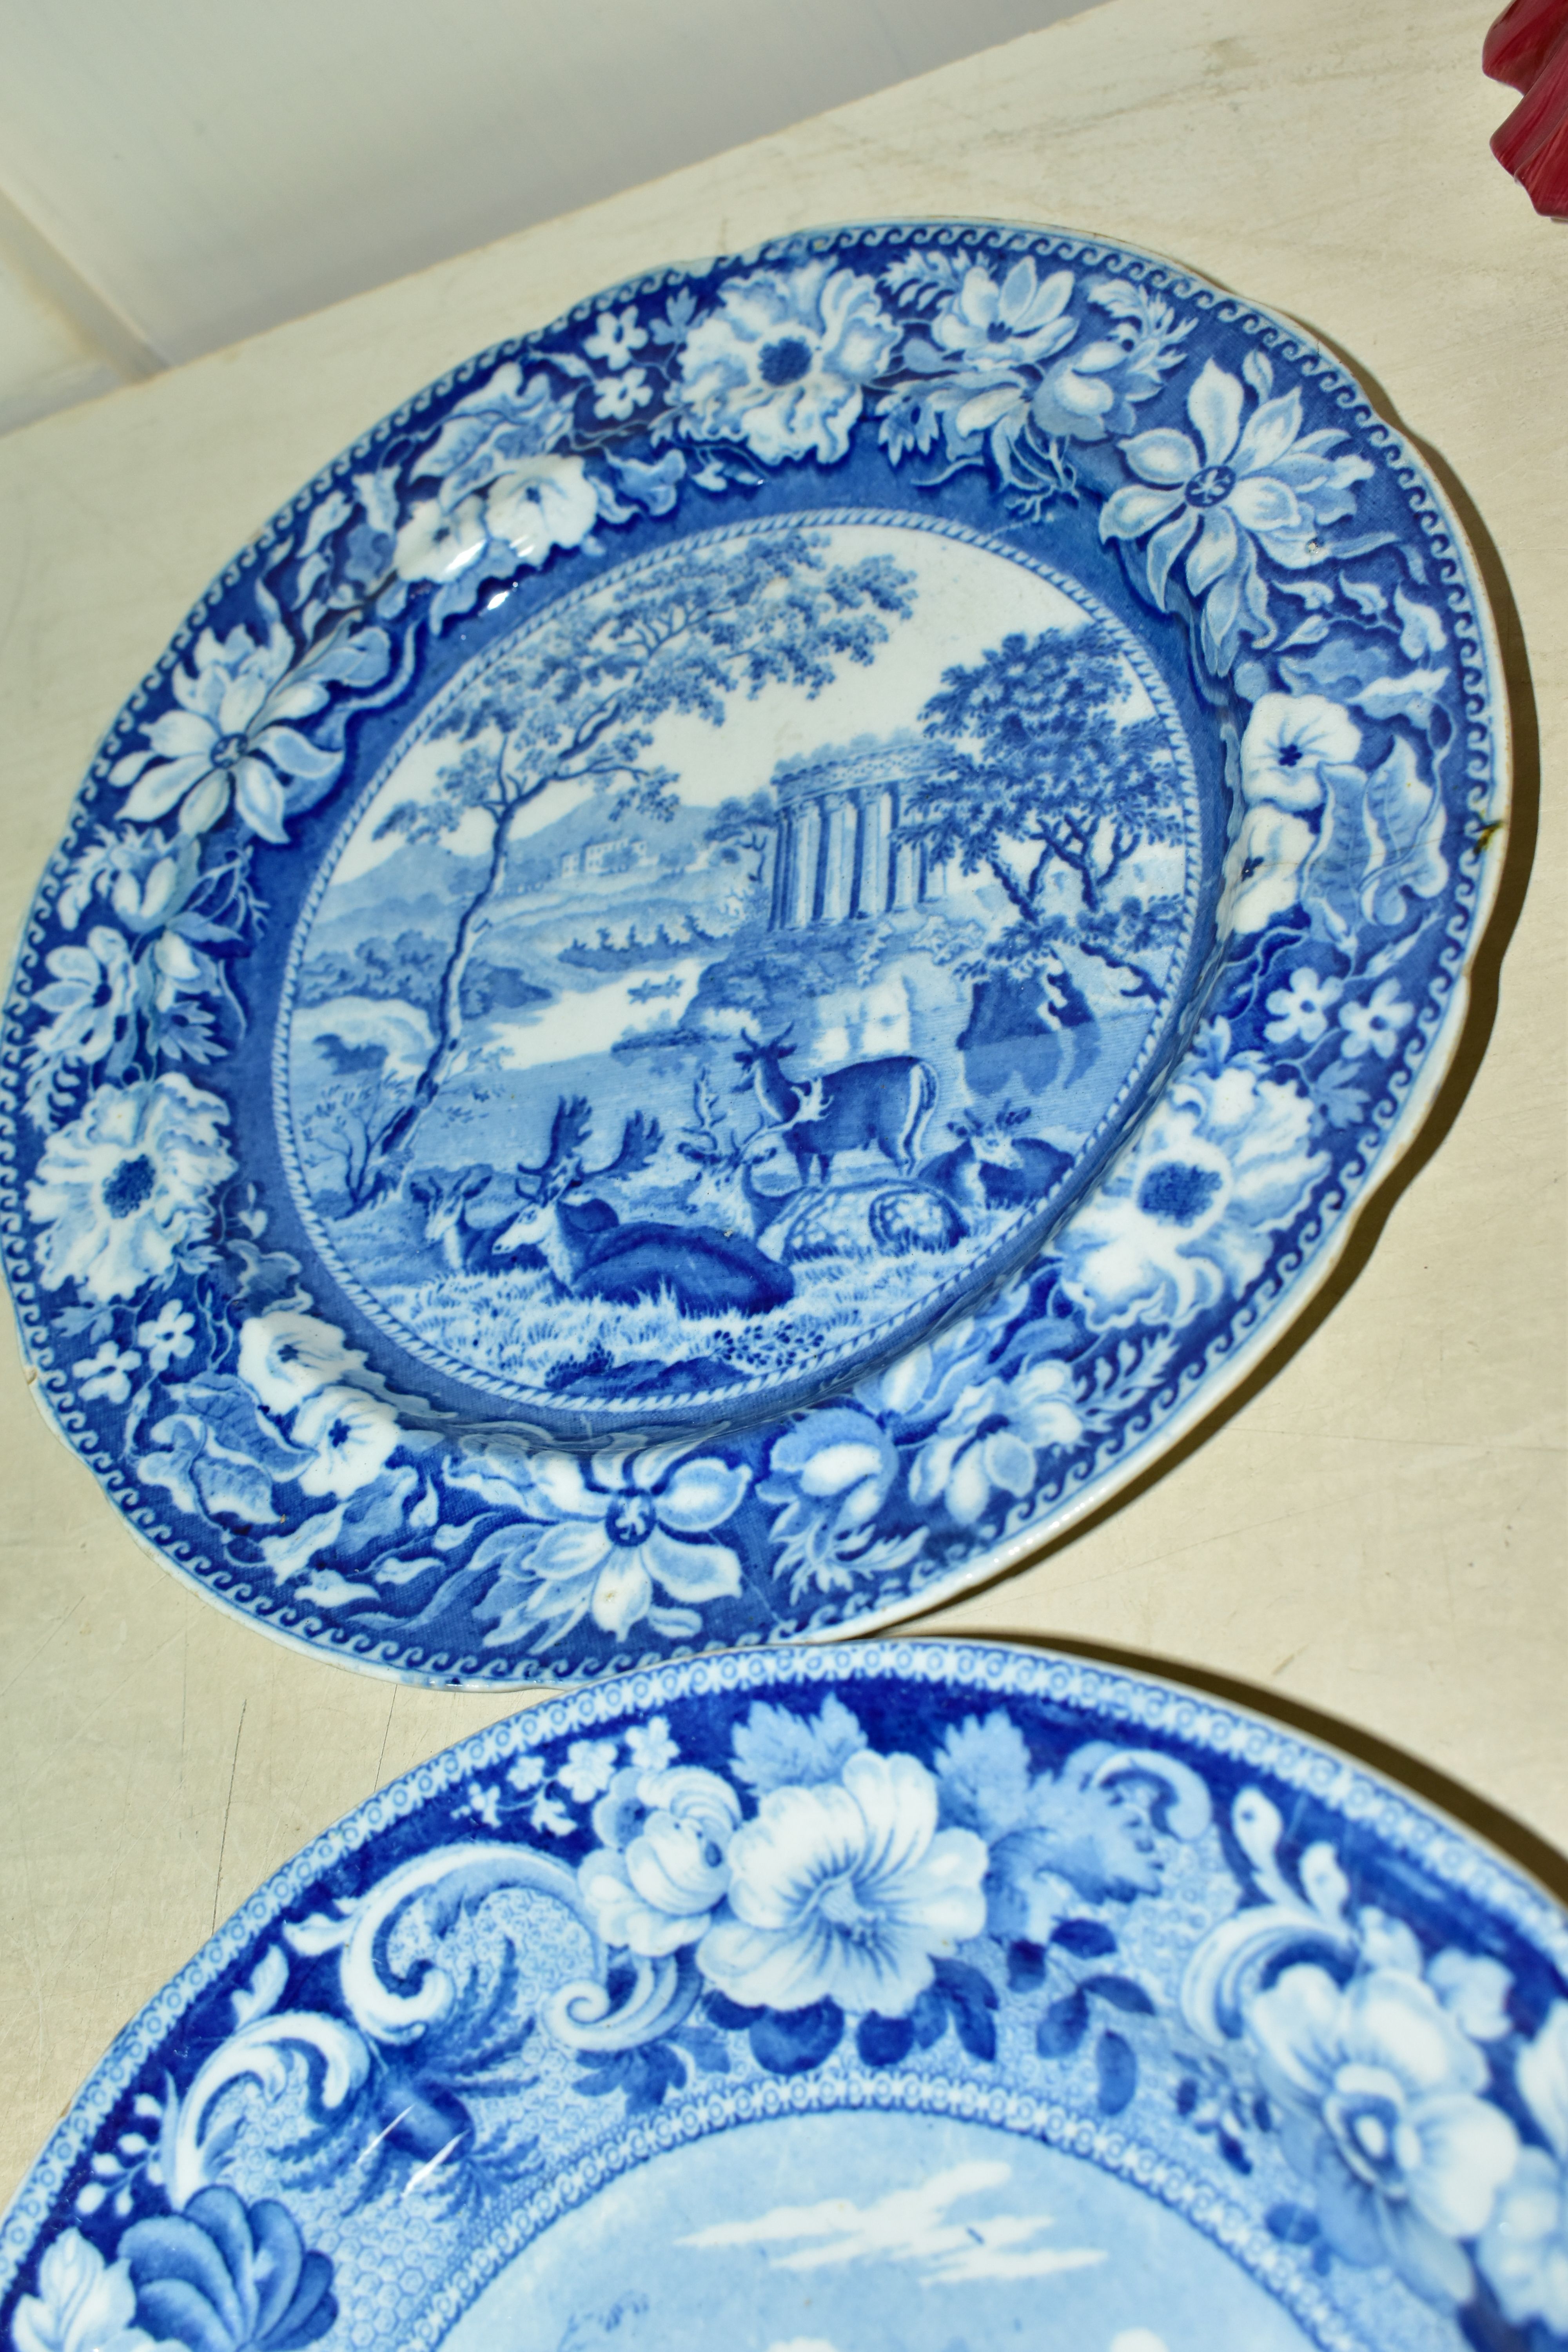 THREE SMALL NINETEENTH CENTURY BLUE AND WHITE PLATES, transfer printed with deer in the landscape, - Image 5 of 5